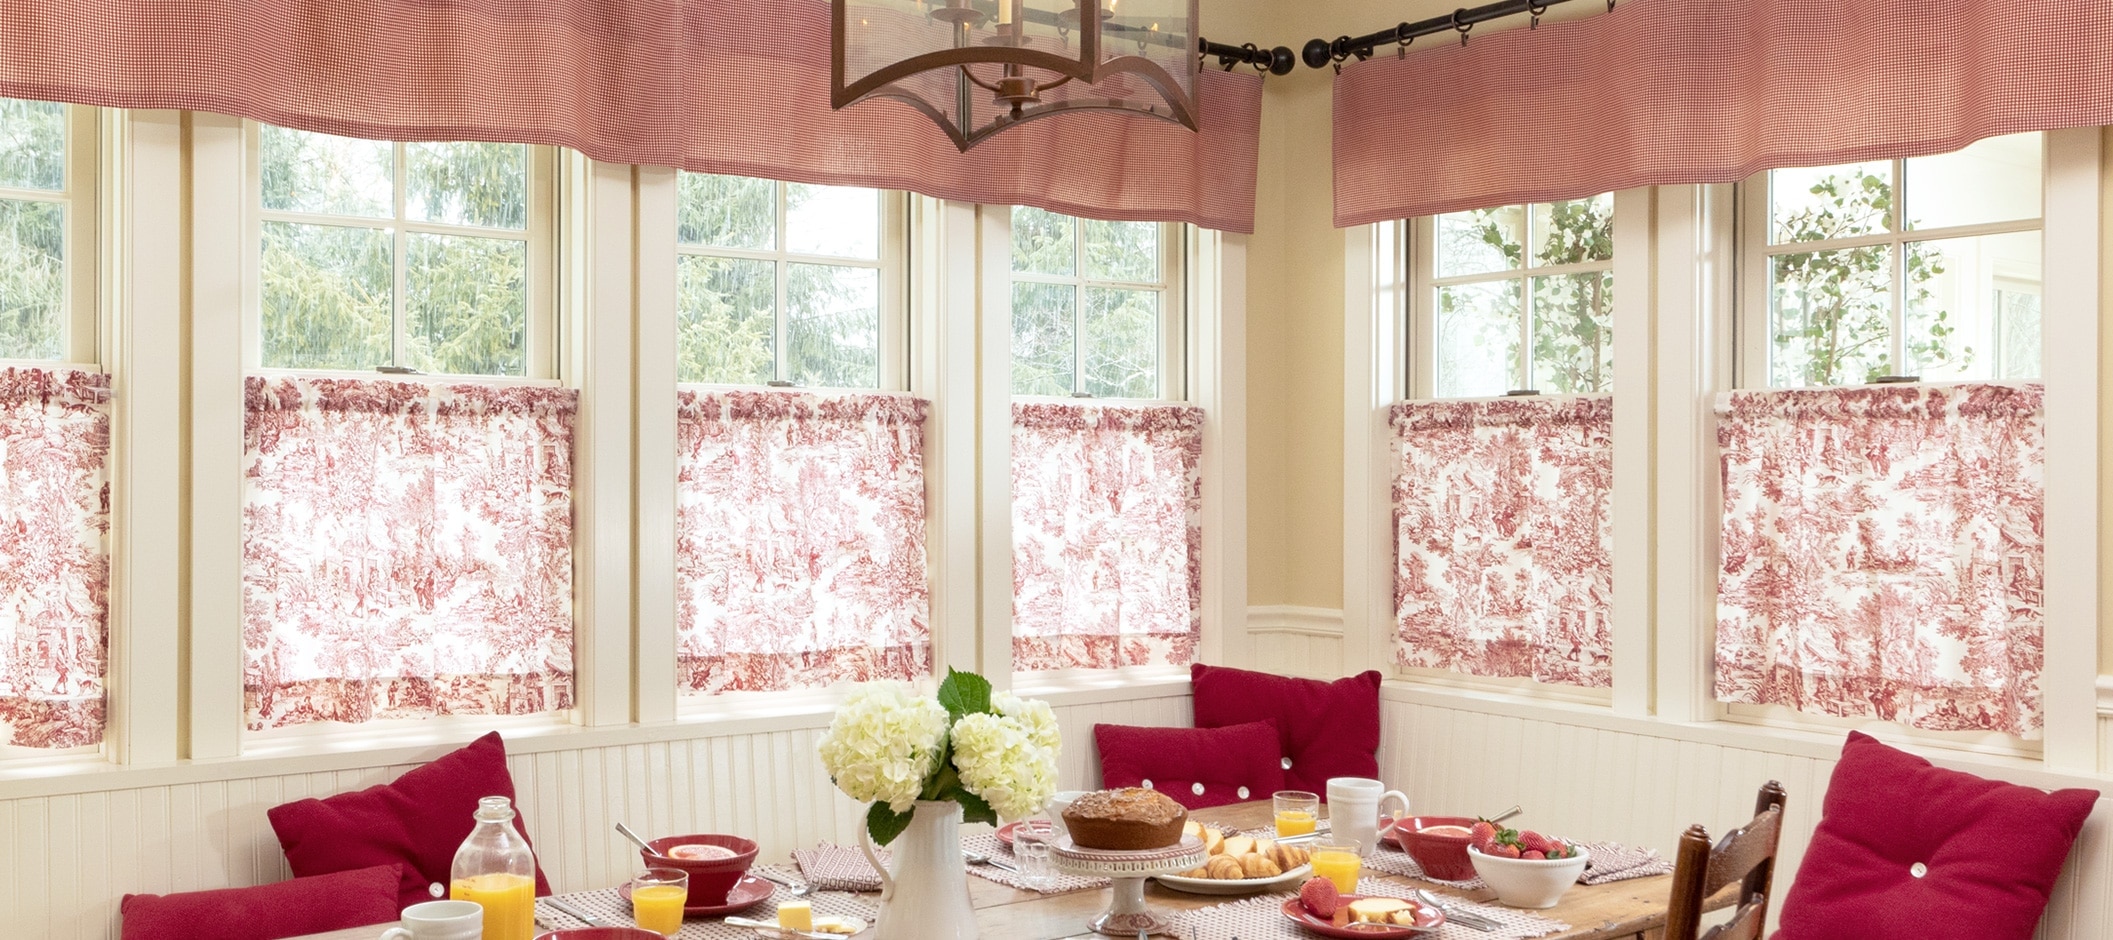 Essex Check Valances paired with Essex Toile Tier Curtains